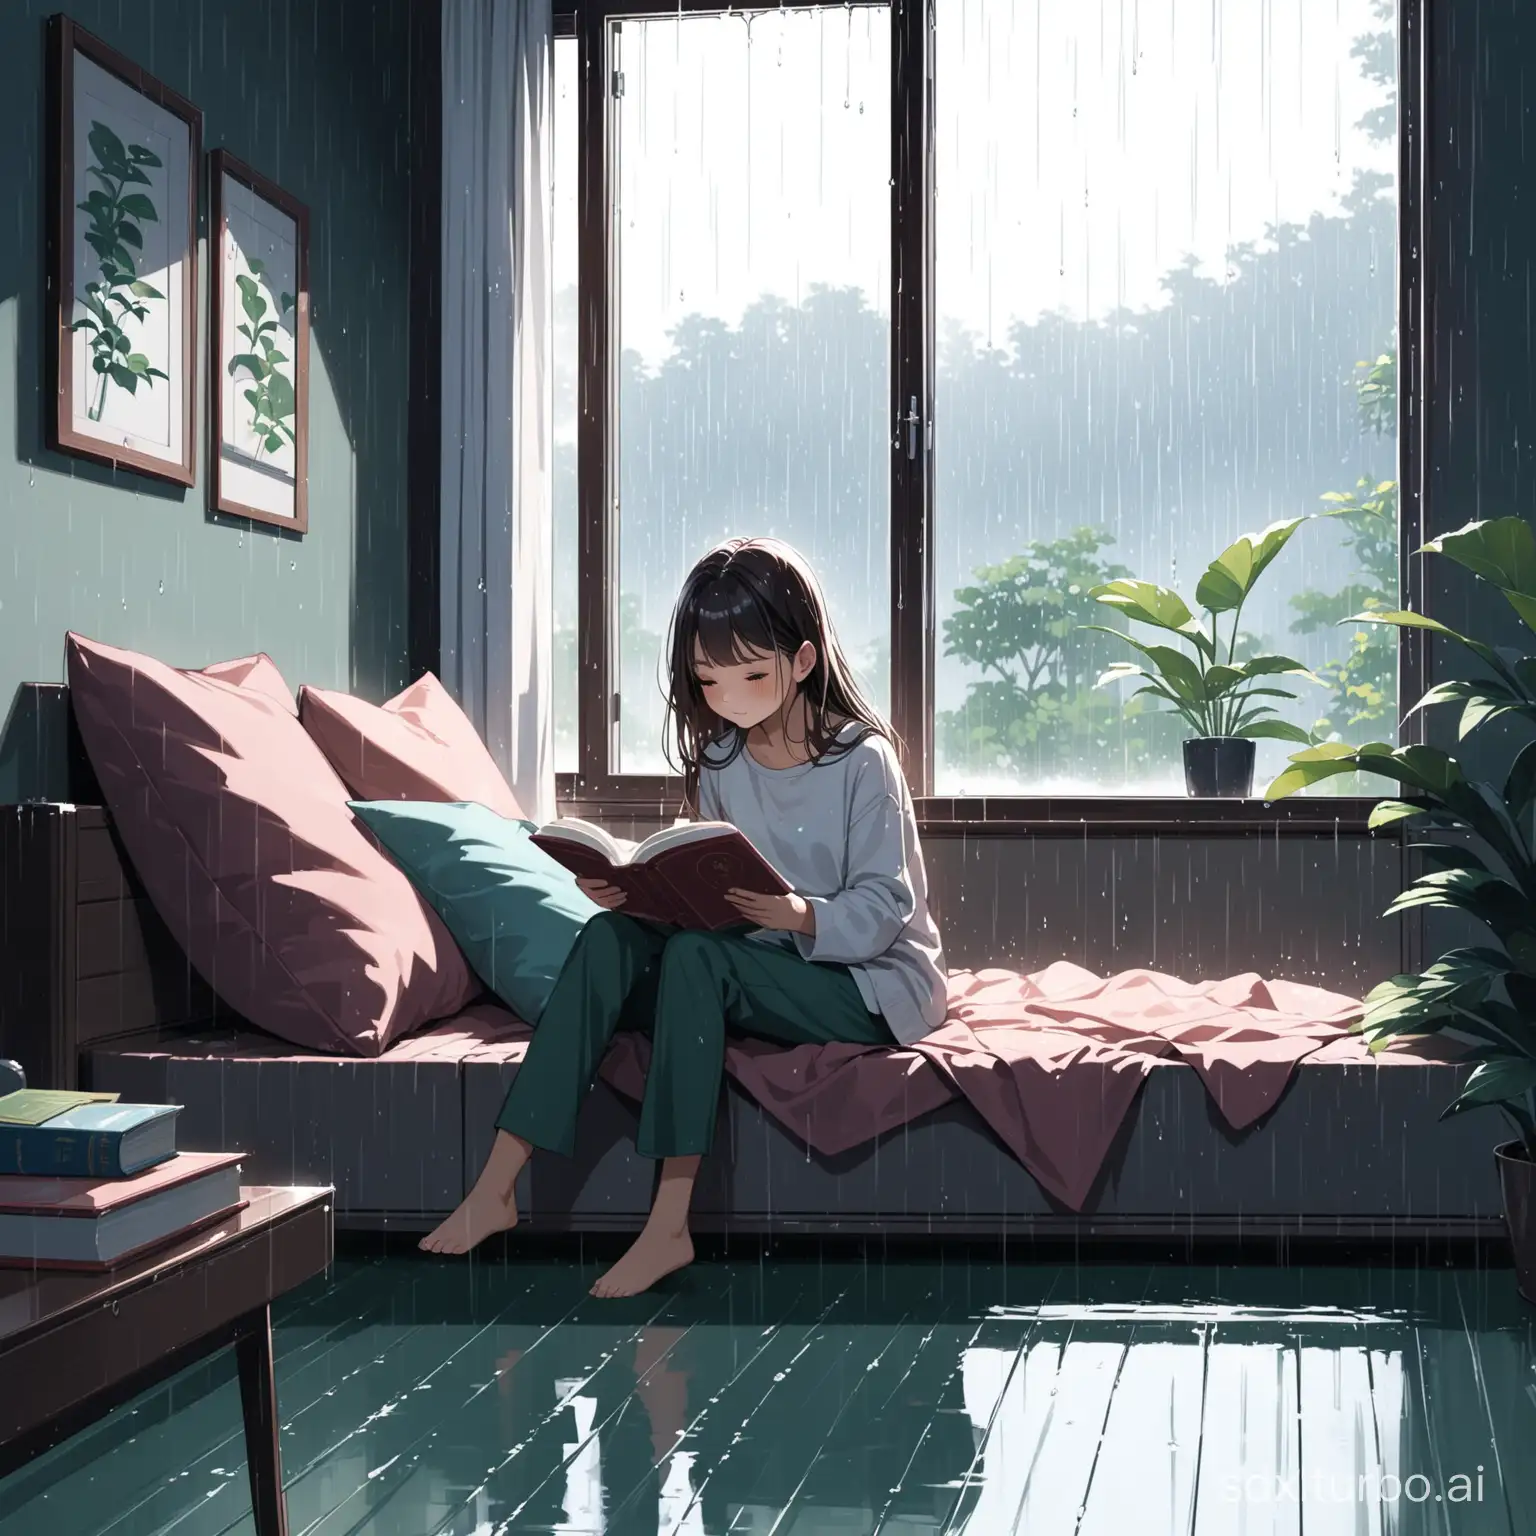 Girl-Reading-Alone-at-Home-on-a-Rainy-Day